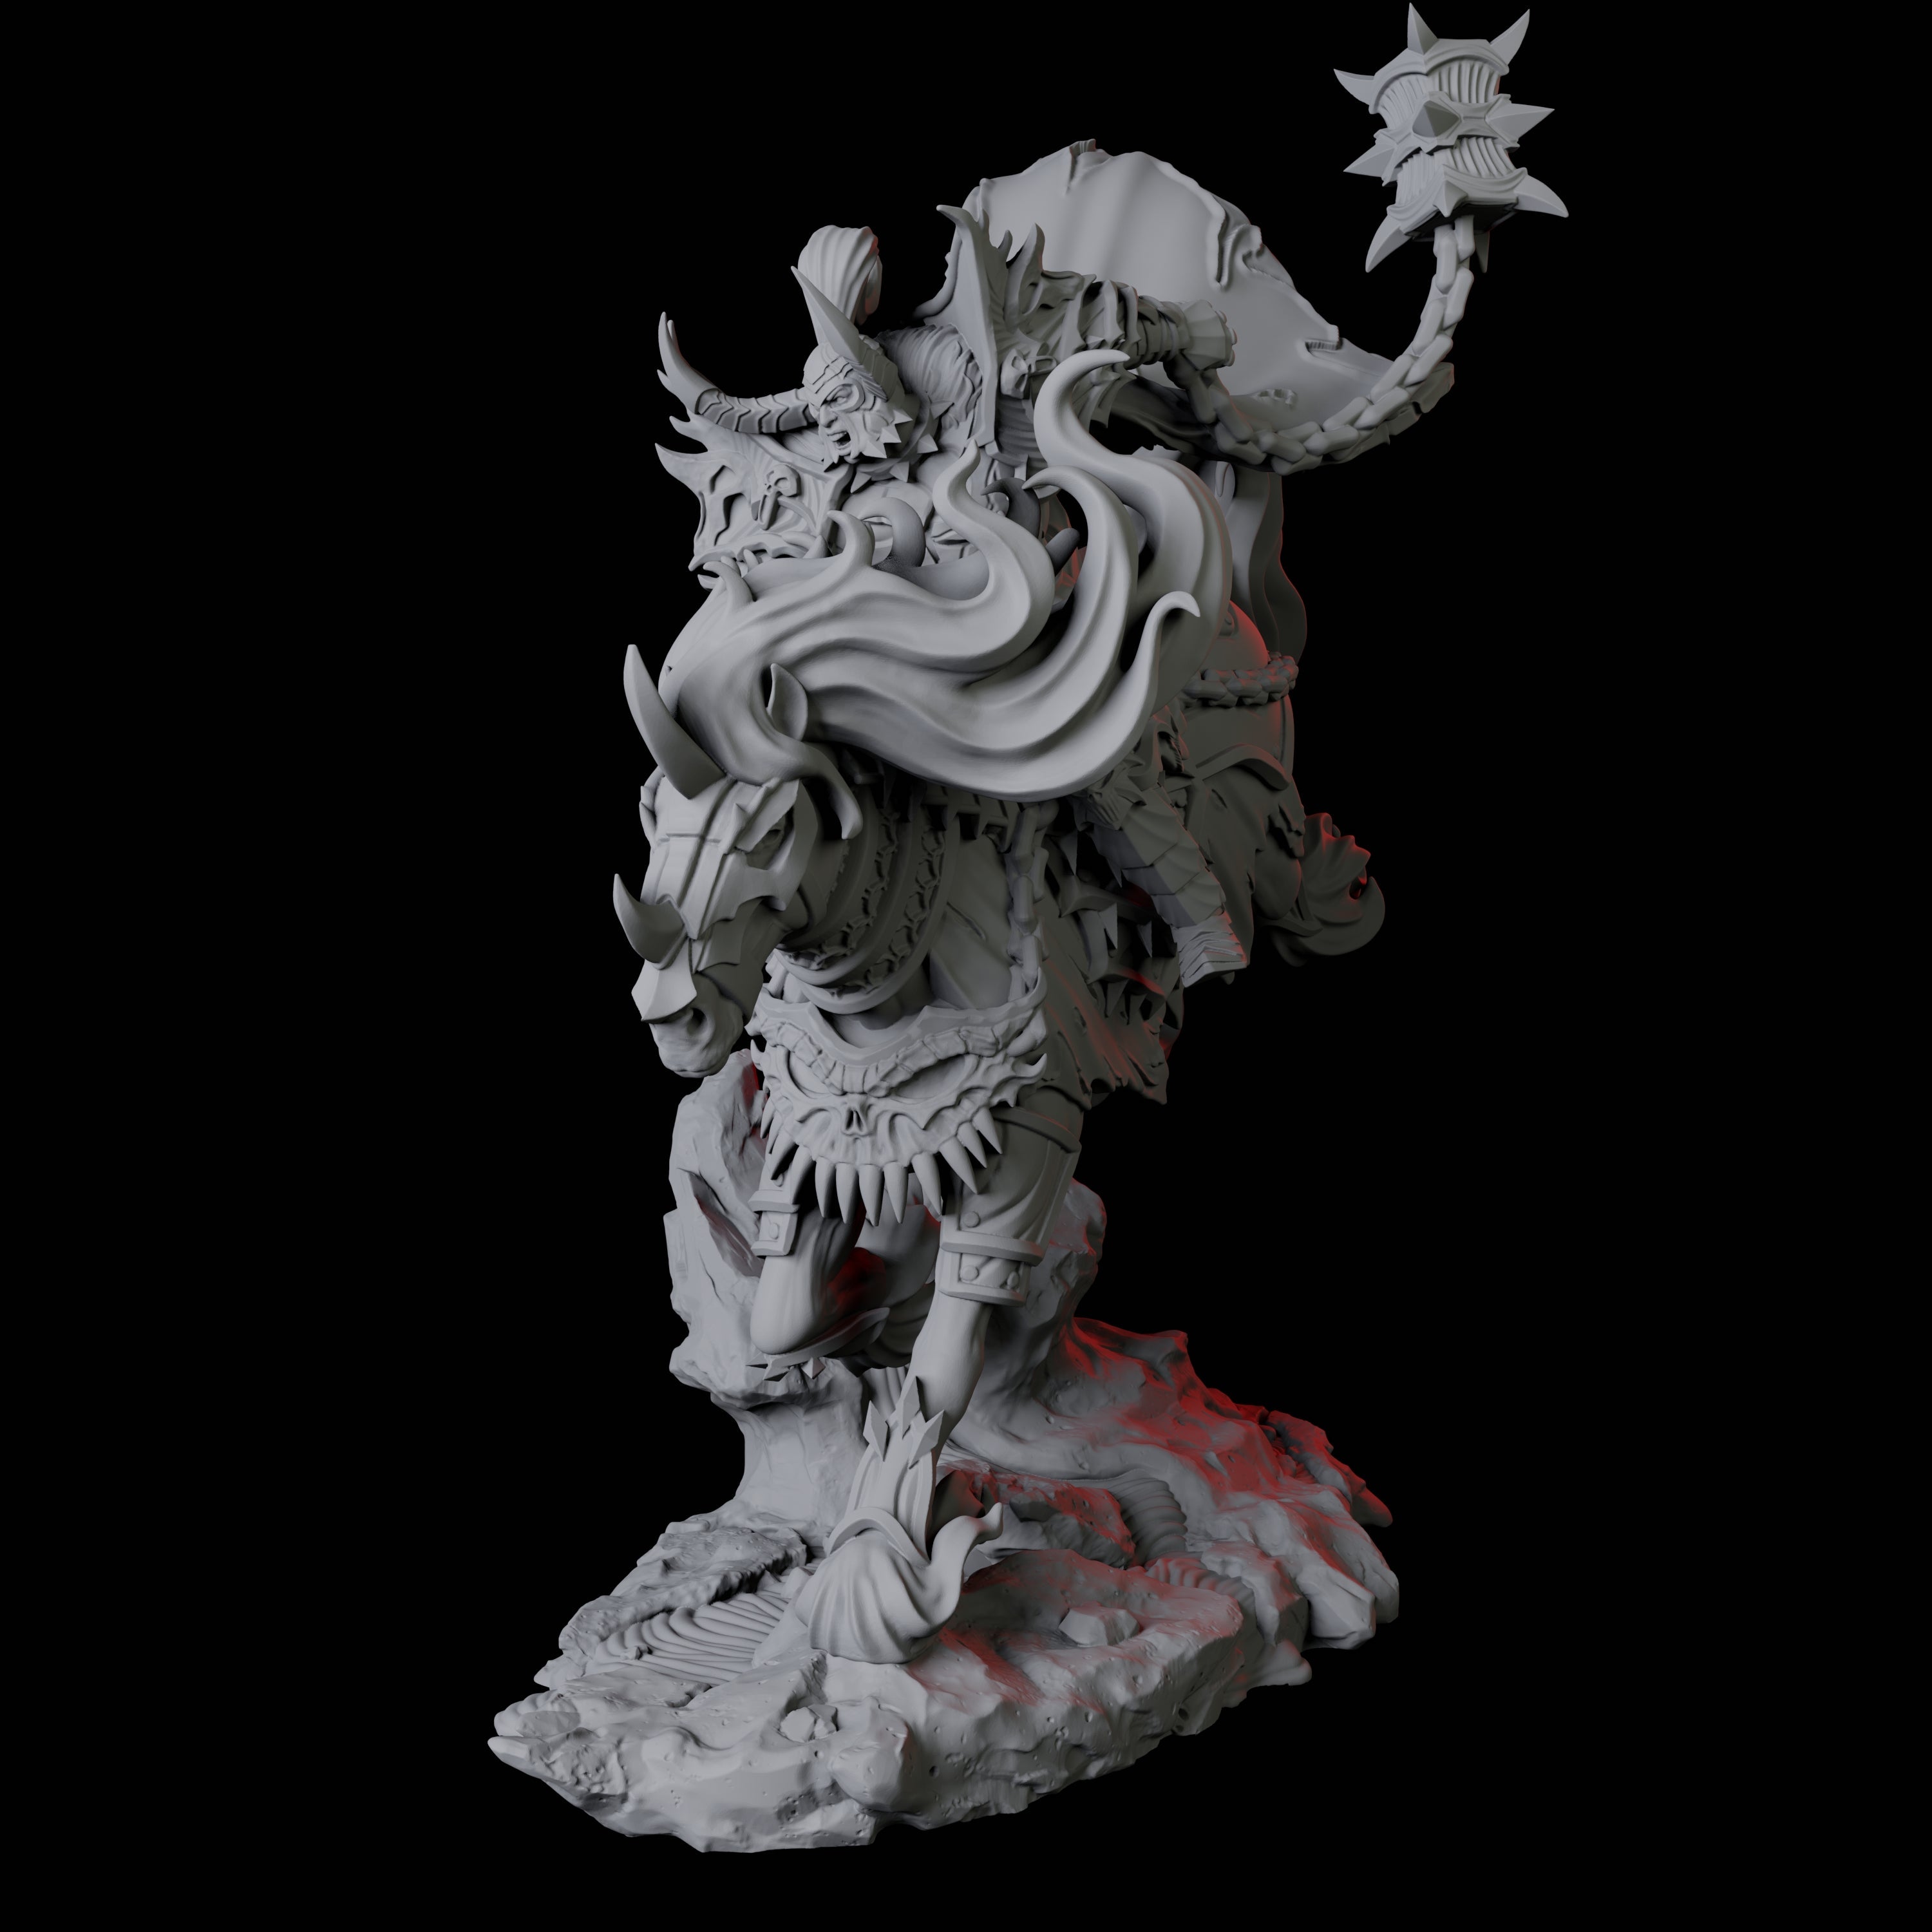 Charging Hellknight C Miniature for Dungeons and Dragons, Pathfinder or other TTRPGs